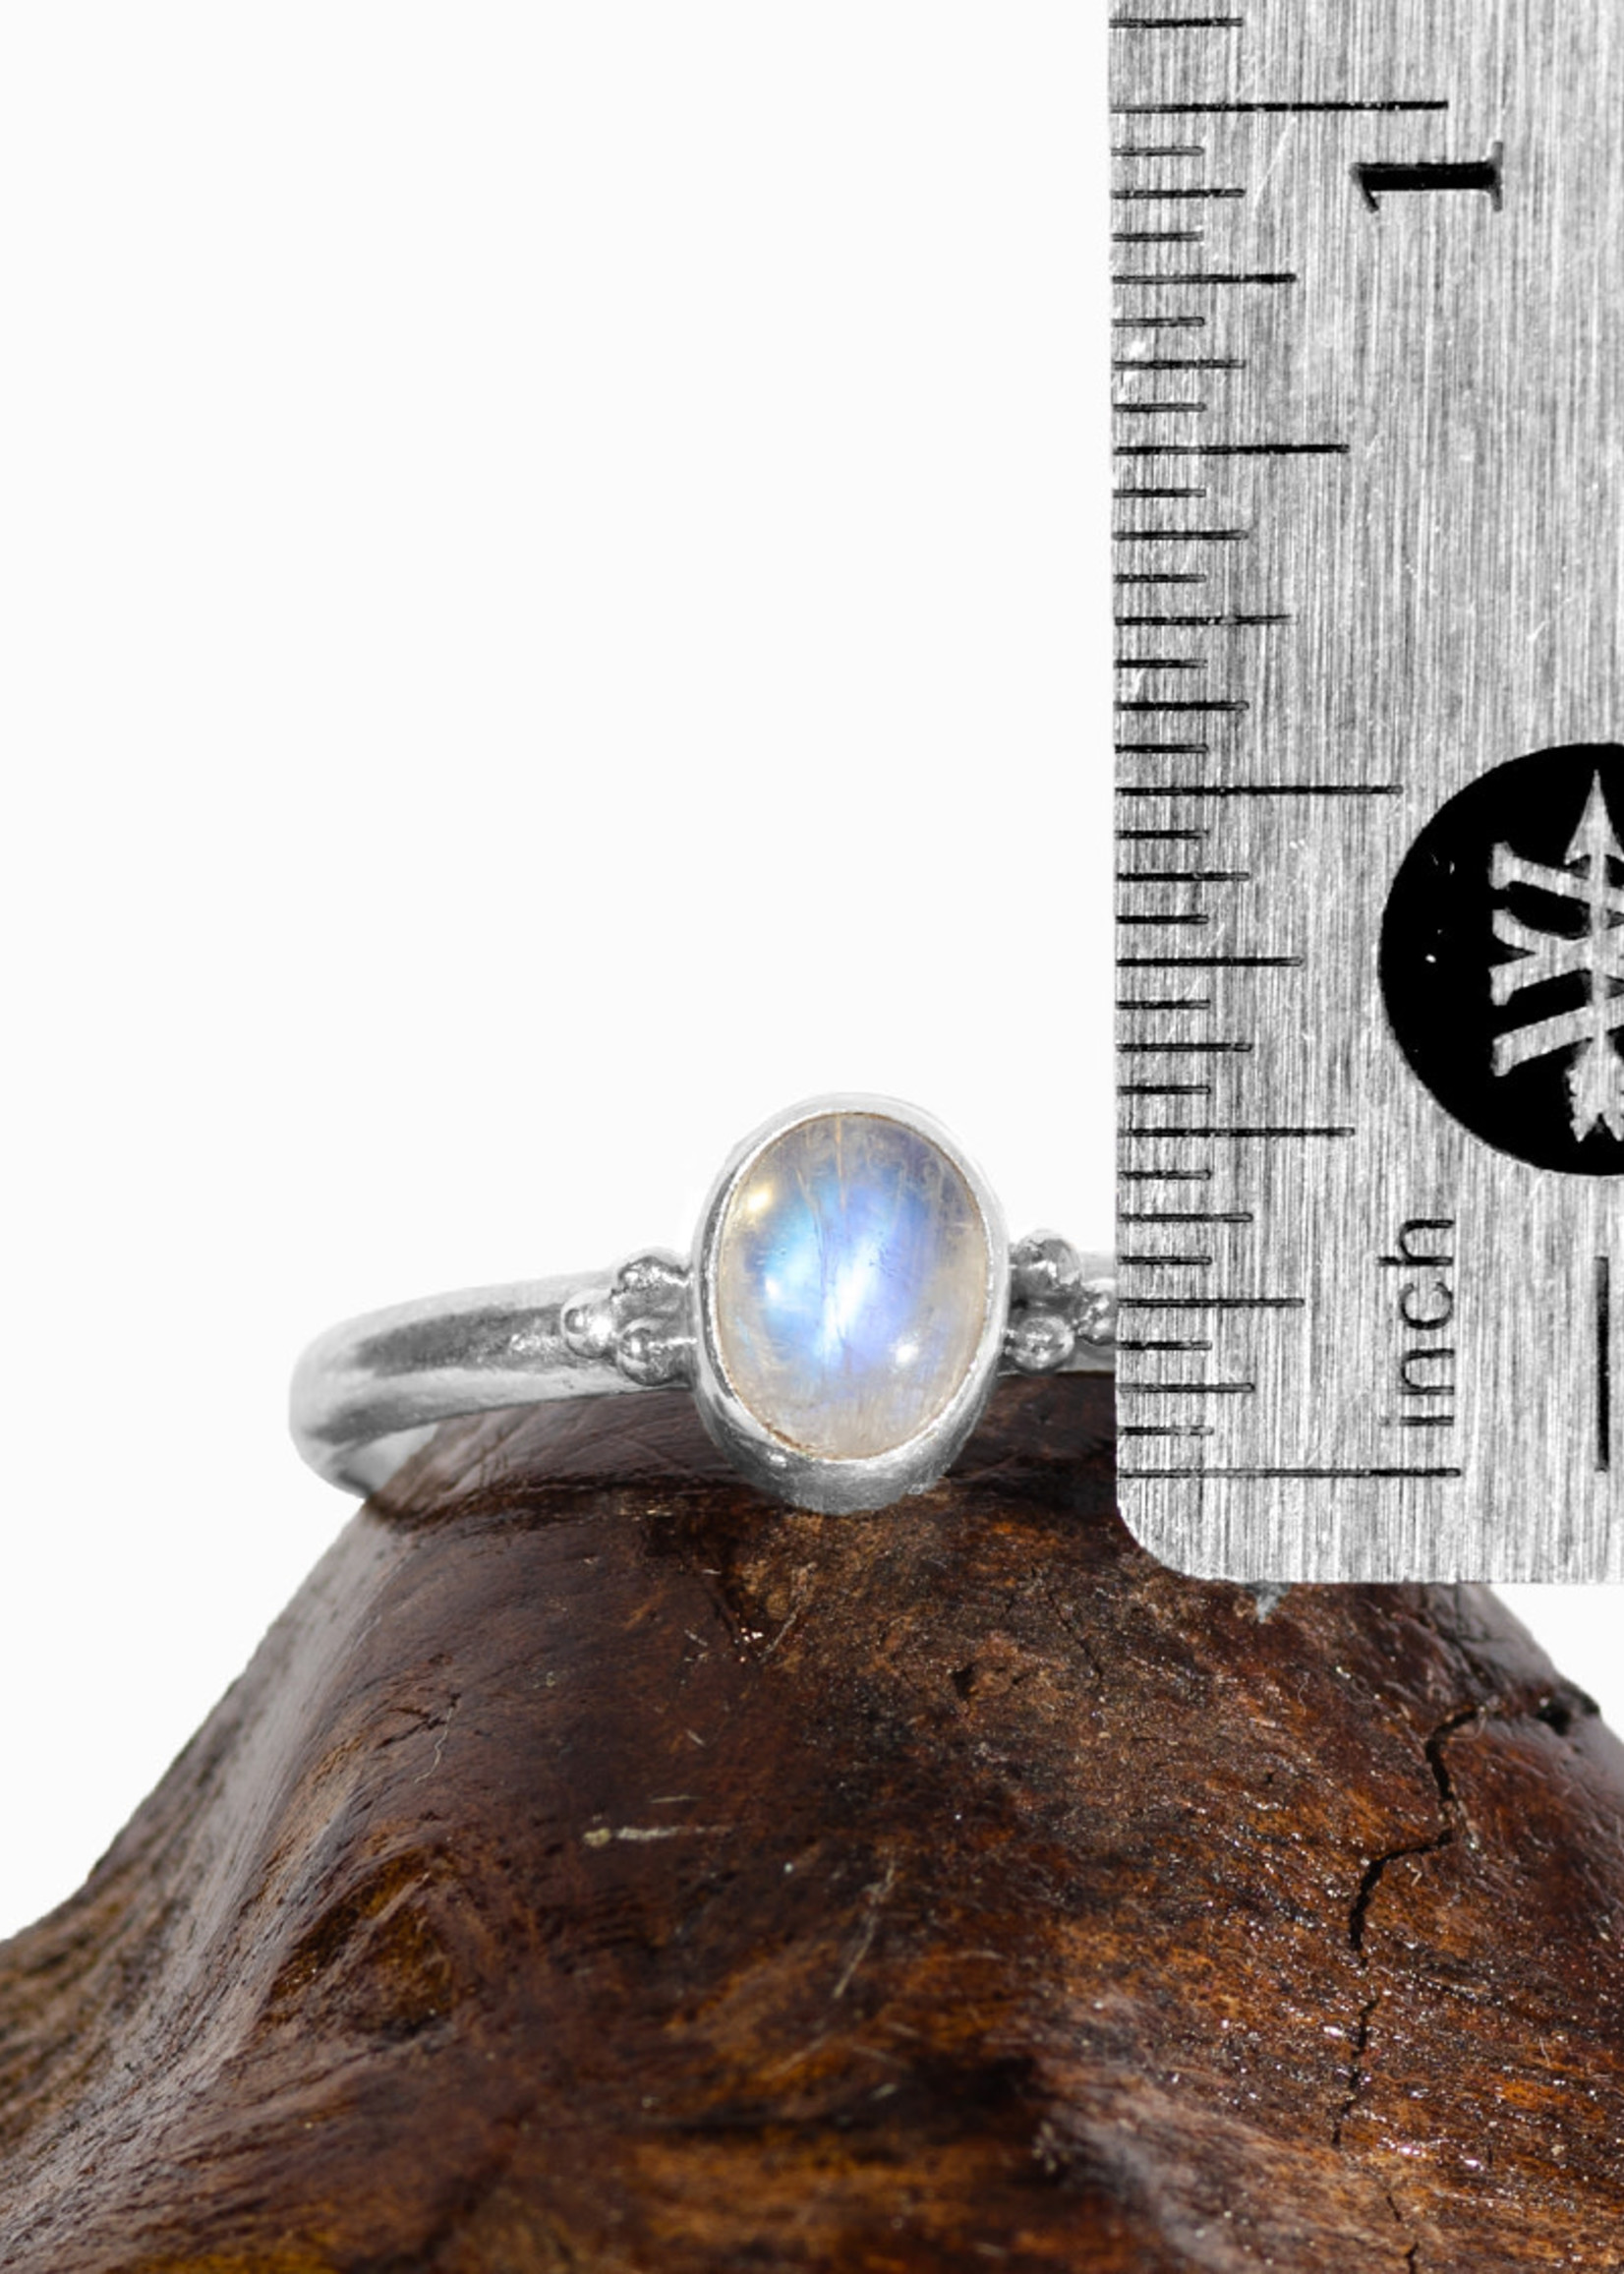 Minerals & Mystics Small Band Gemstone Ring with Accent